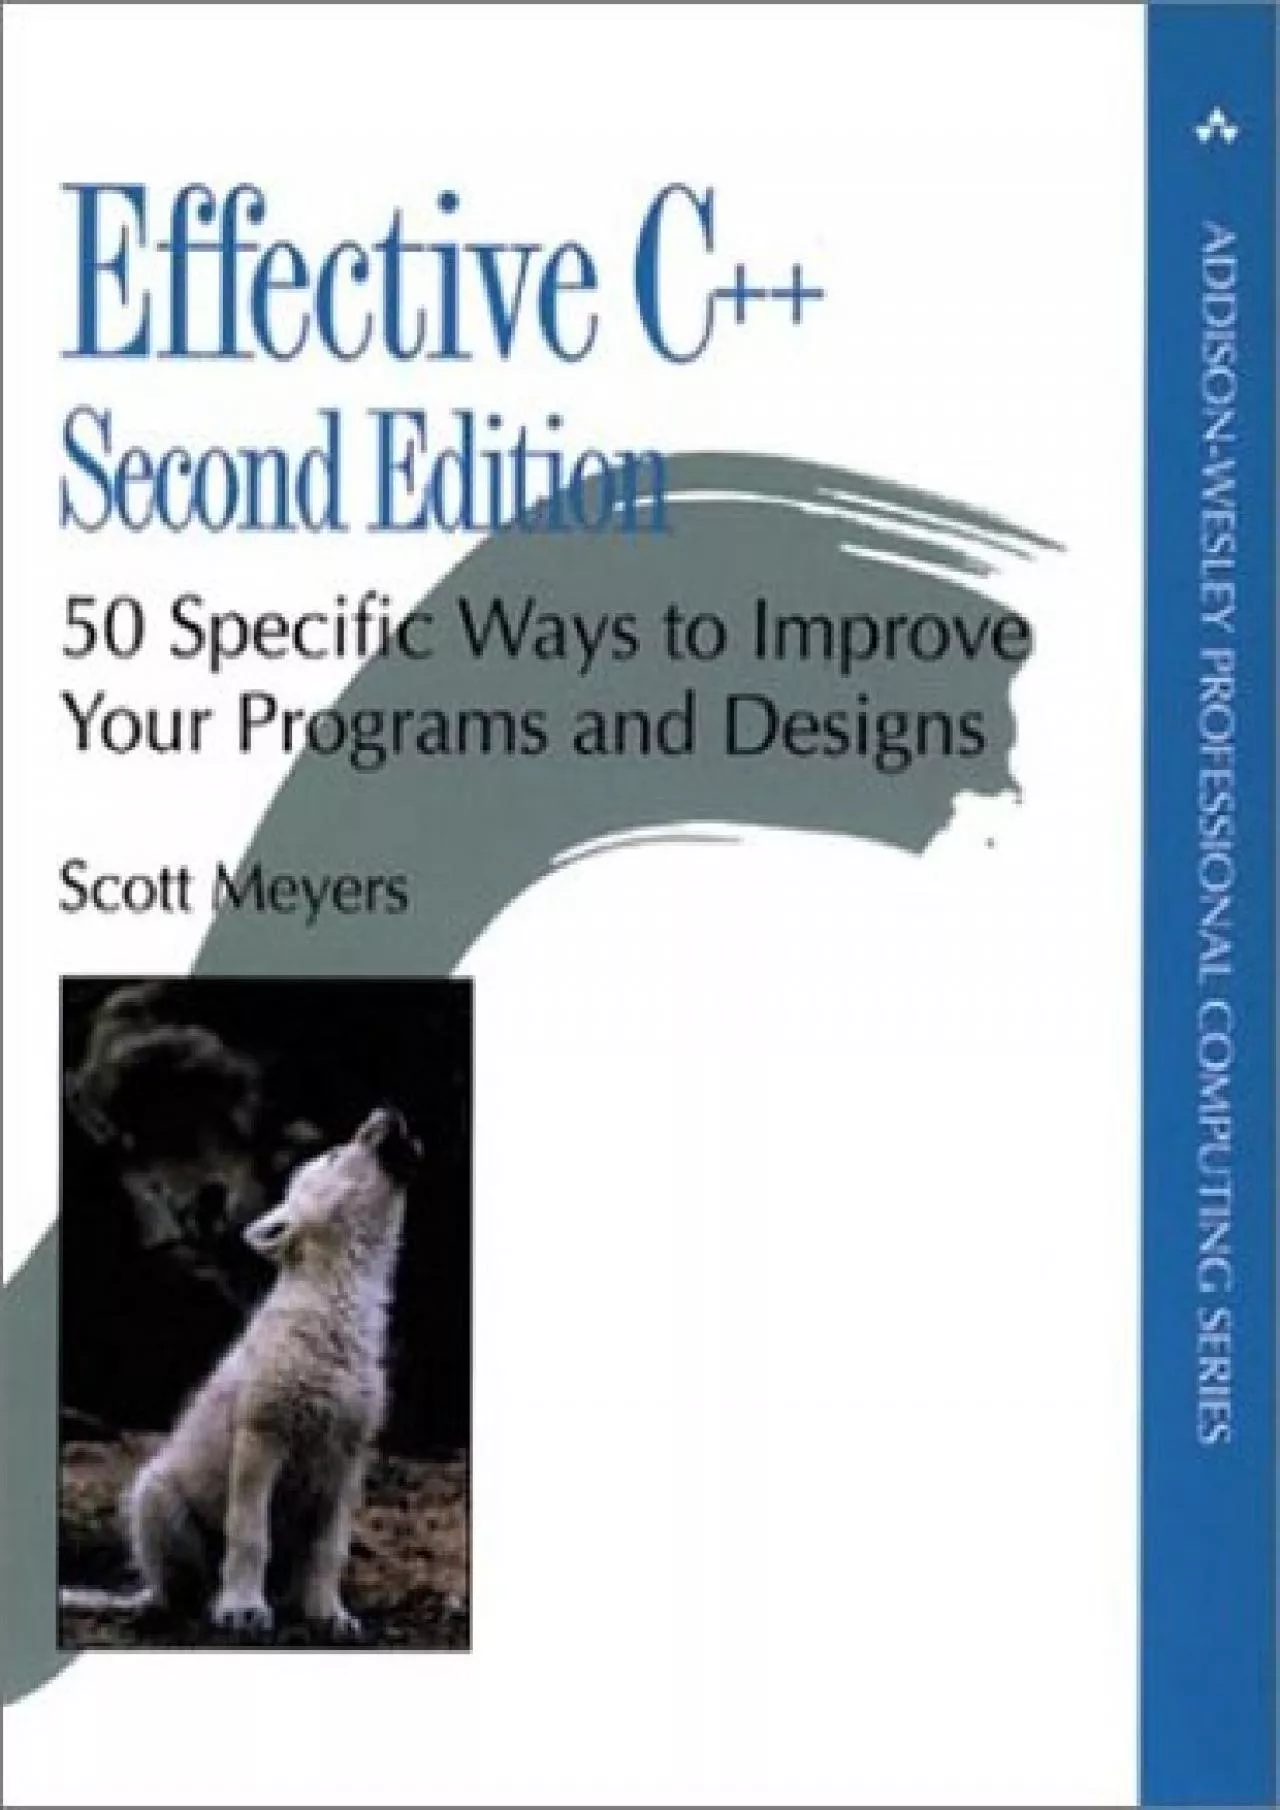 [READ]-Effective C++: 50 Specific Ways to Improve Your Programs and Designs (Addison-Wesley